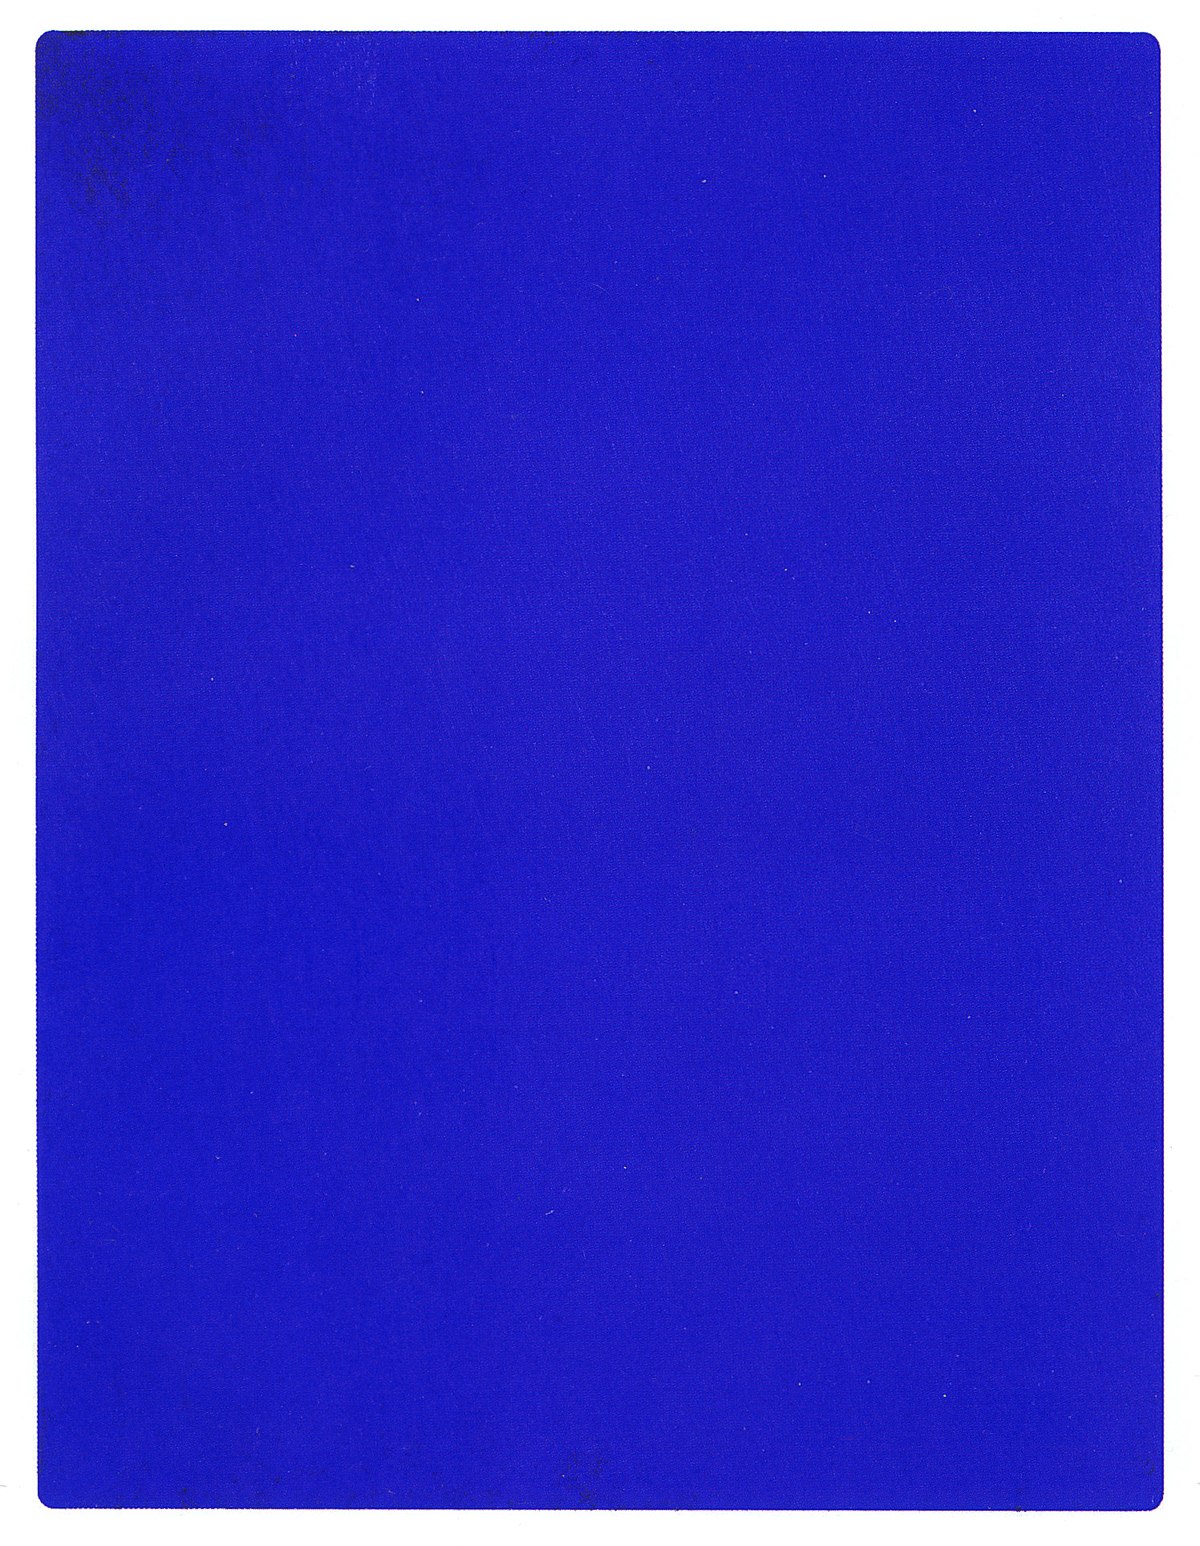 Yves Klein Blue represents the culmination of the history of blue in art. 